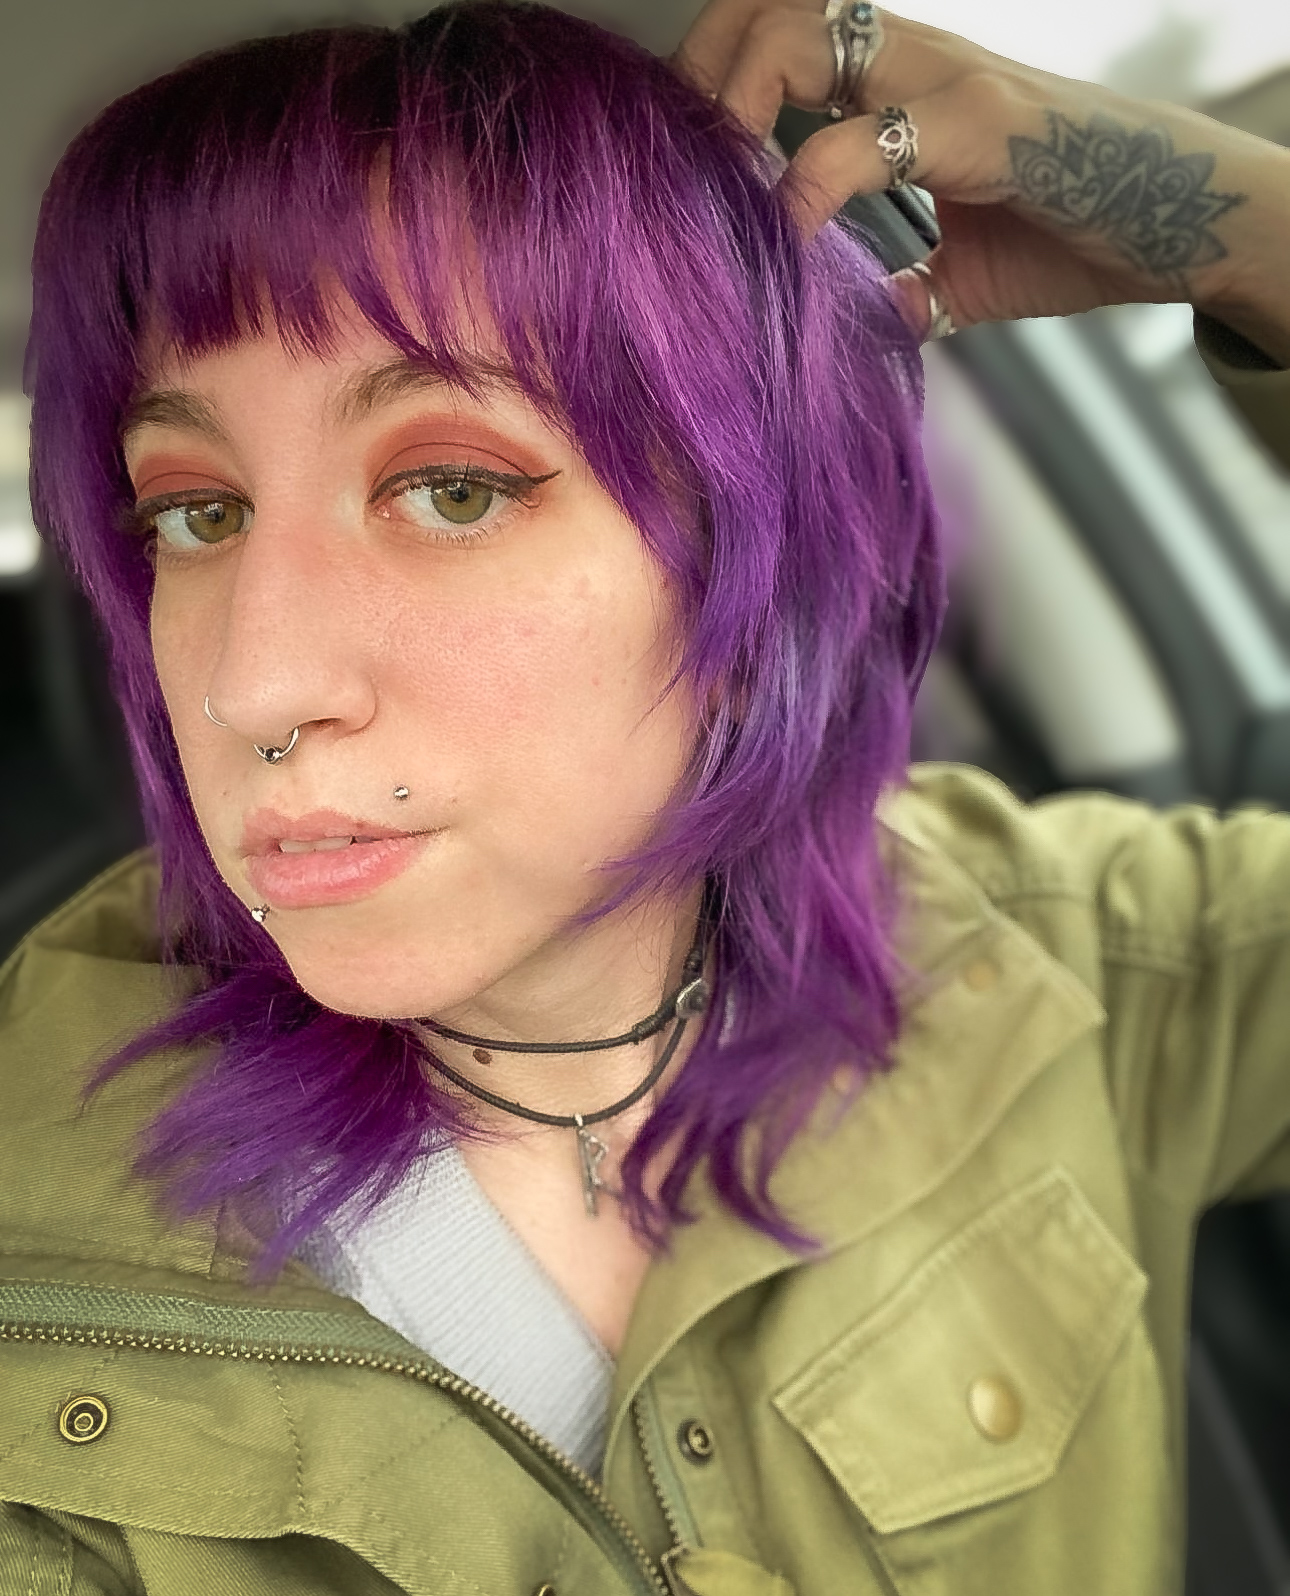 A selfie of Sara in her car. She is sporting purple hair in this photo.